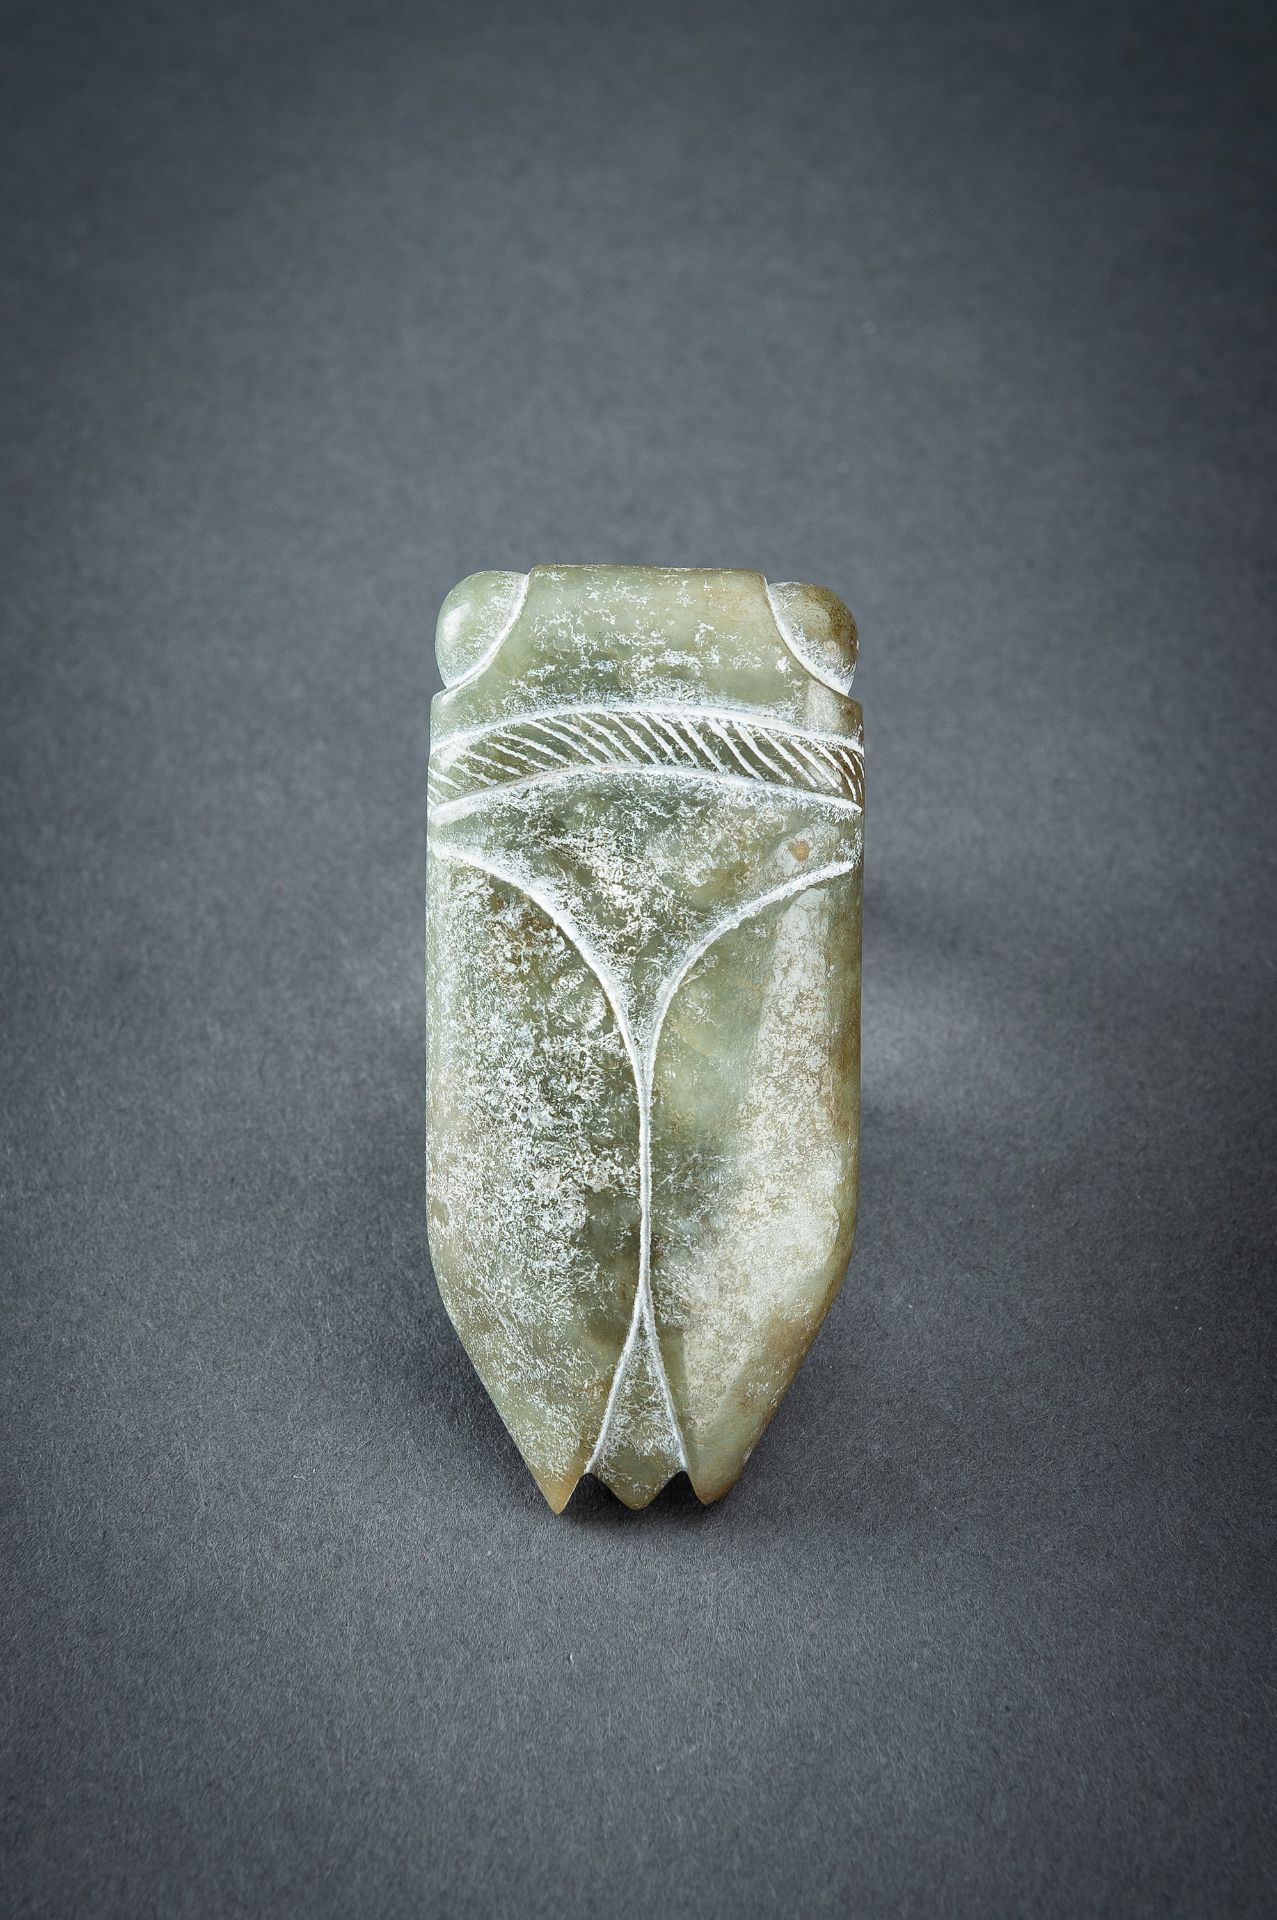 AN ARCHAISTIC GREEN JADE PENDANT OF A CICADA - Image 19 of 20